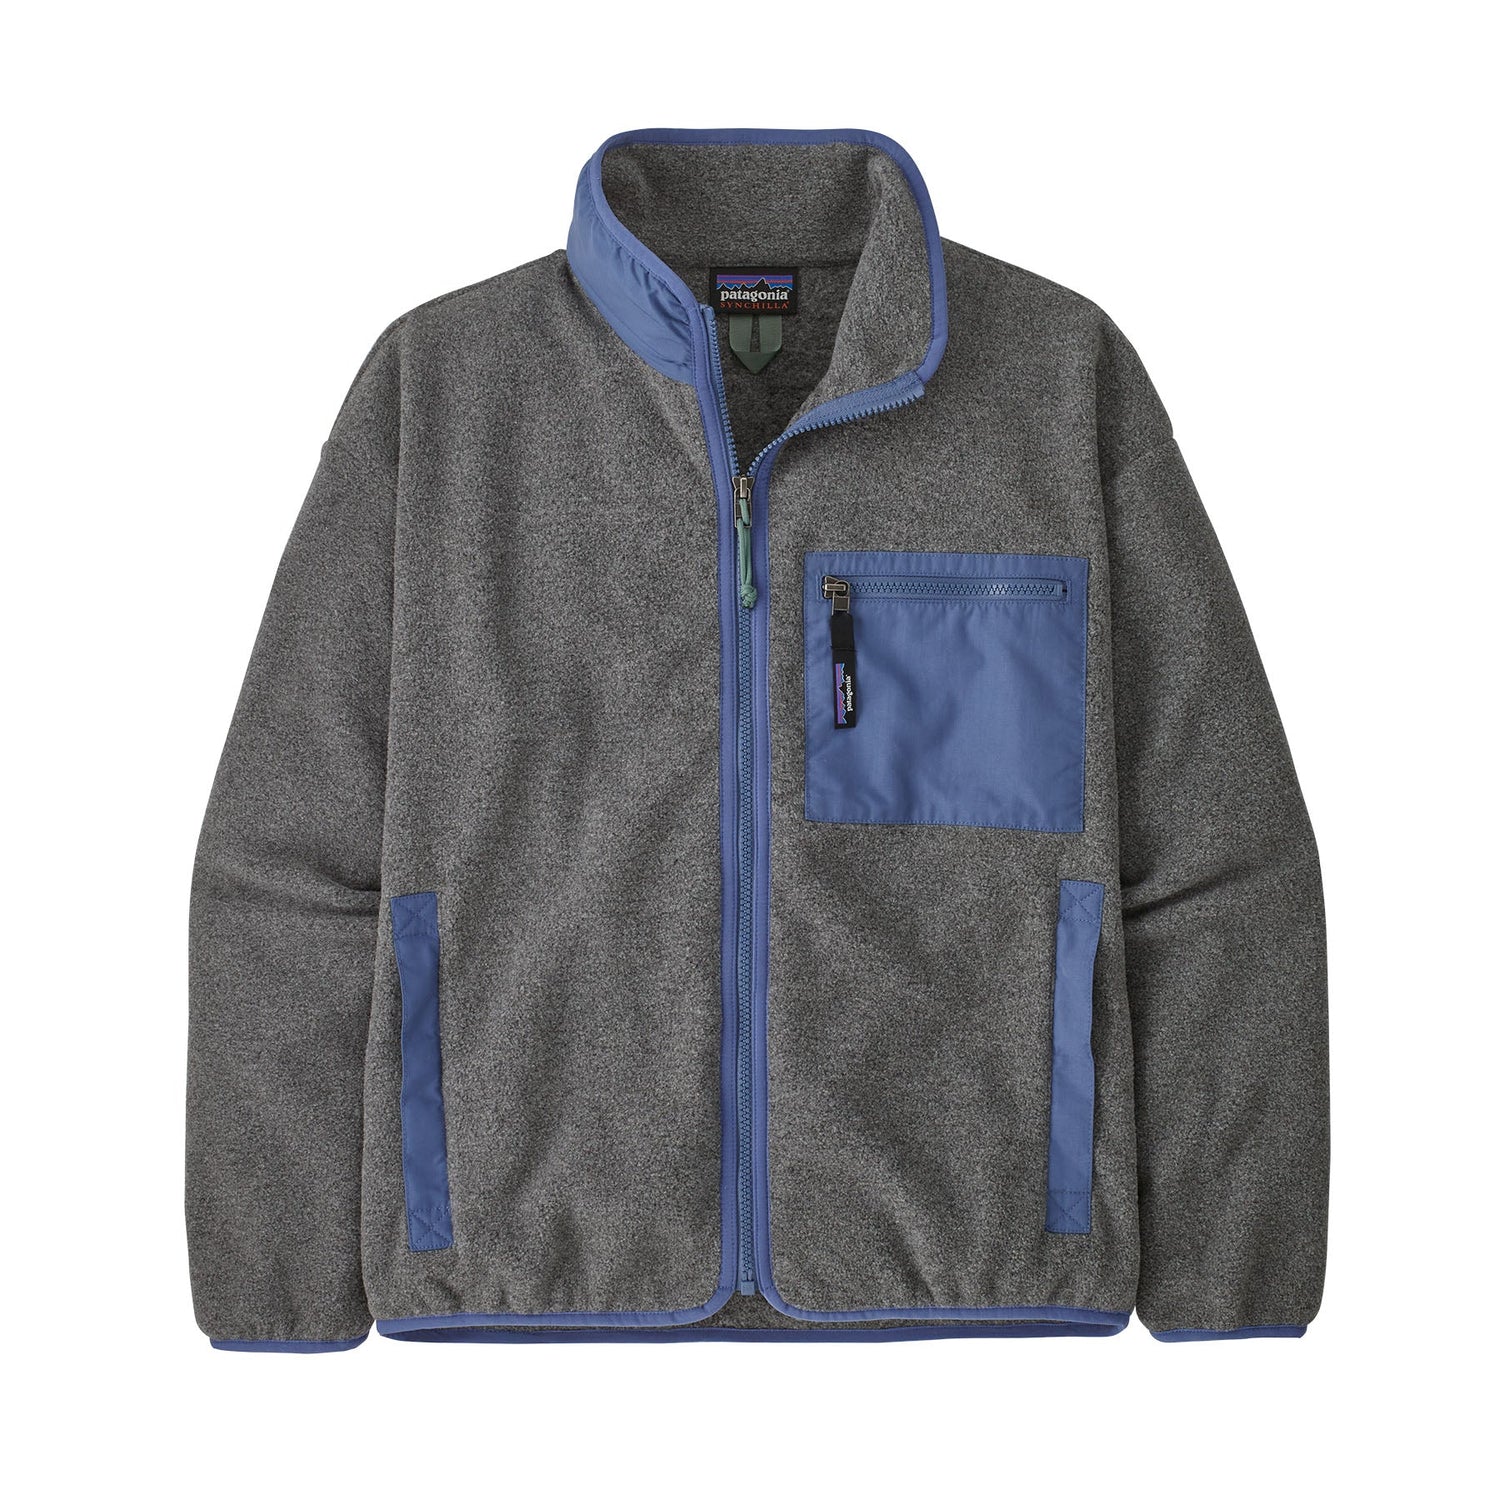 Patagonia W's Synchilla® Fleece Jacket - 100% recycled polyester Nickel Jacket